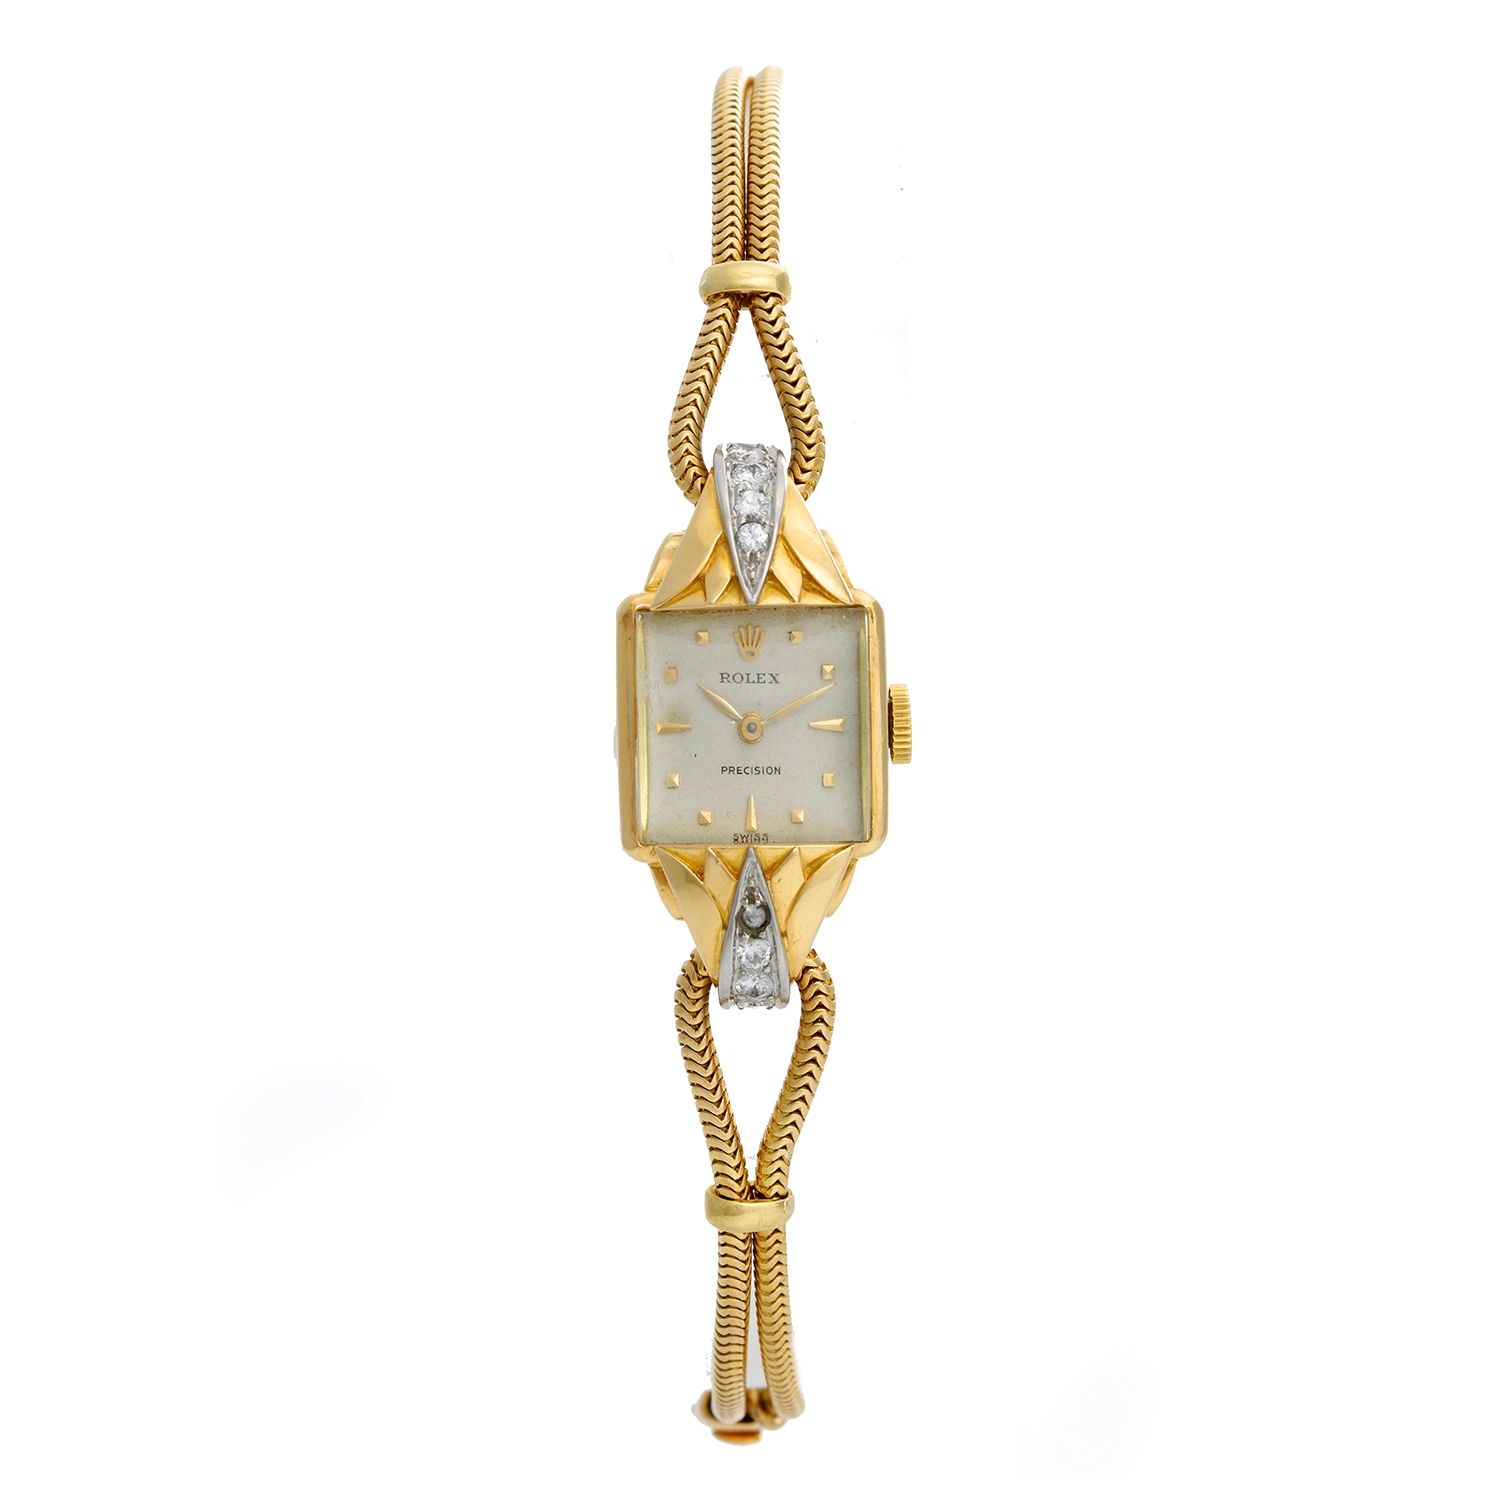 Unusual Vintage Watch Yellow Gold ca. 1940's